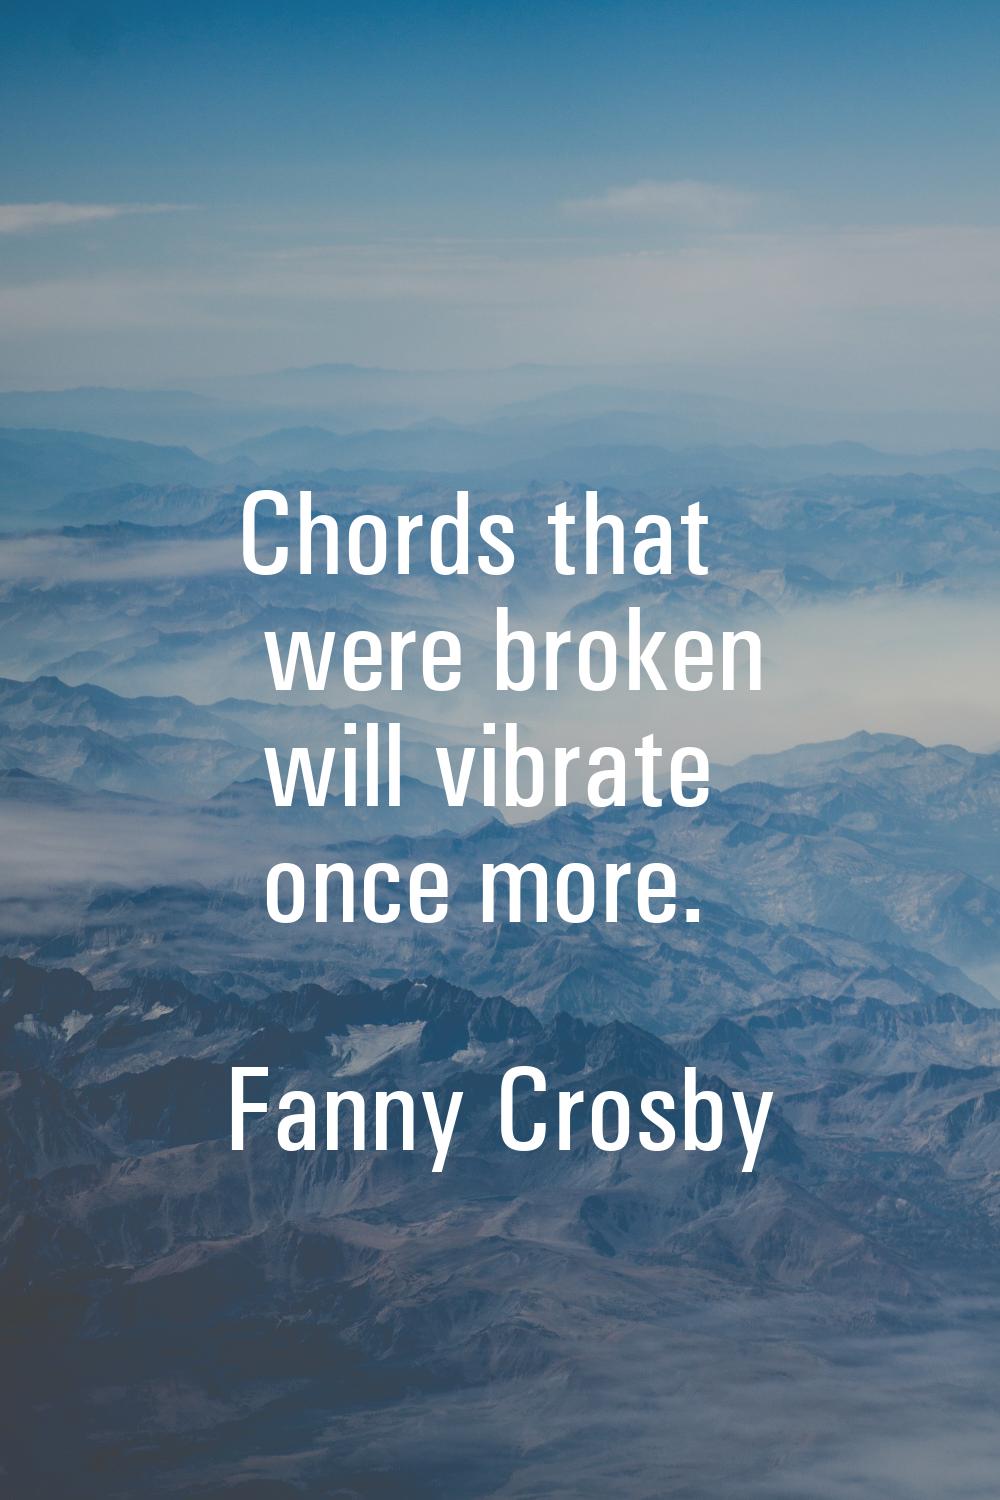 Chords that were broken will vibrate once more.